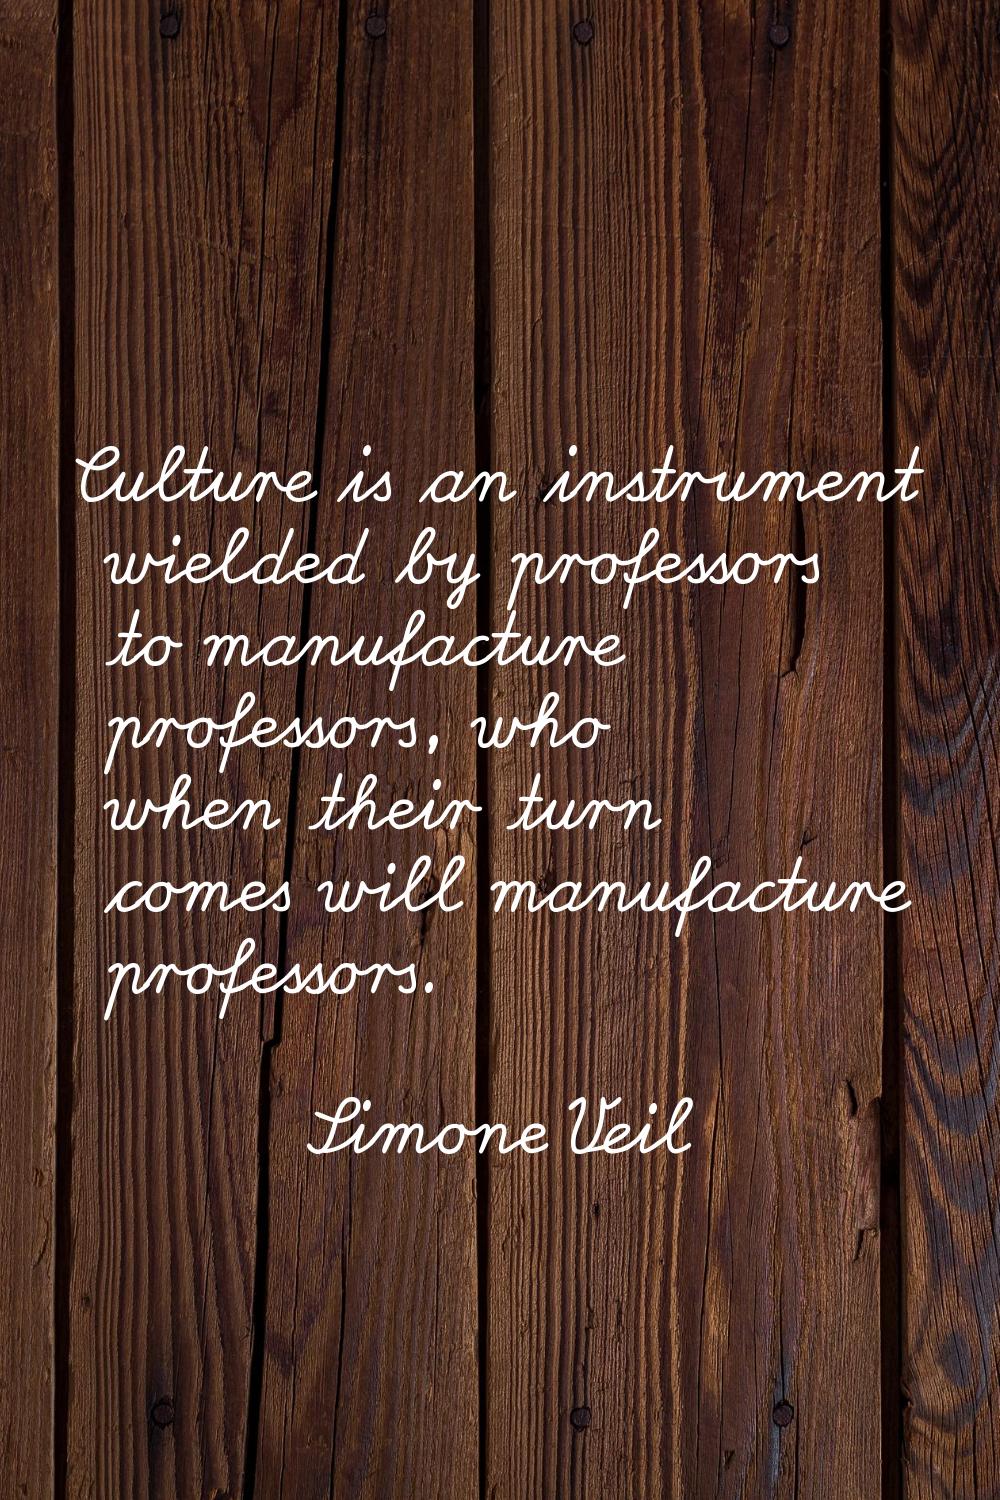 Culture is an instrument wielded by professors to manufacture professors, who when their turn comes